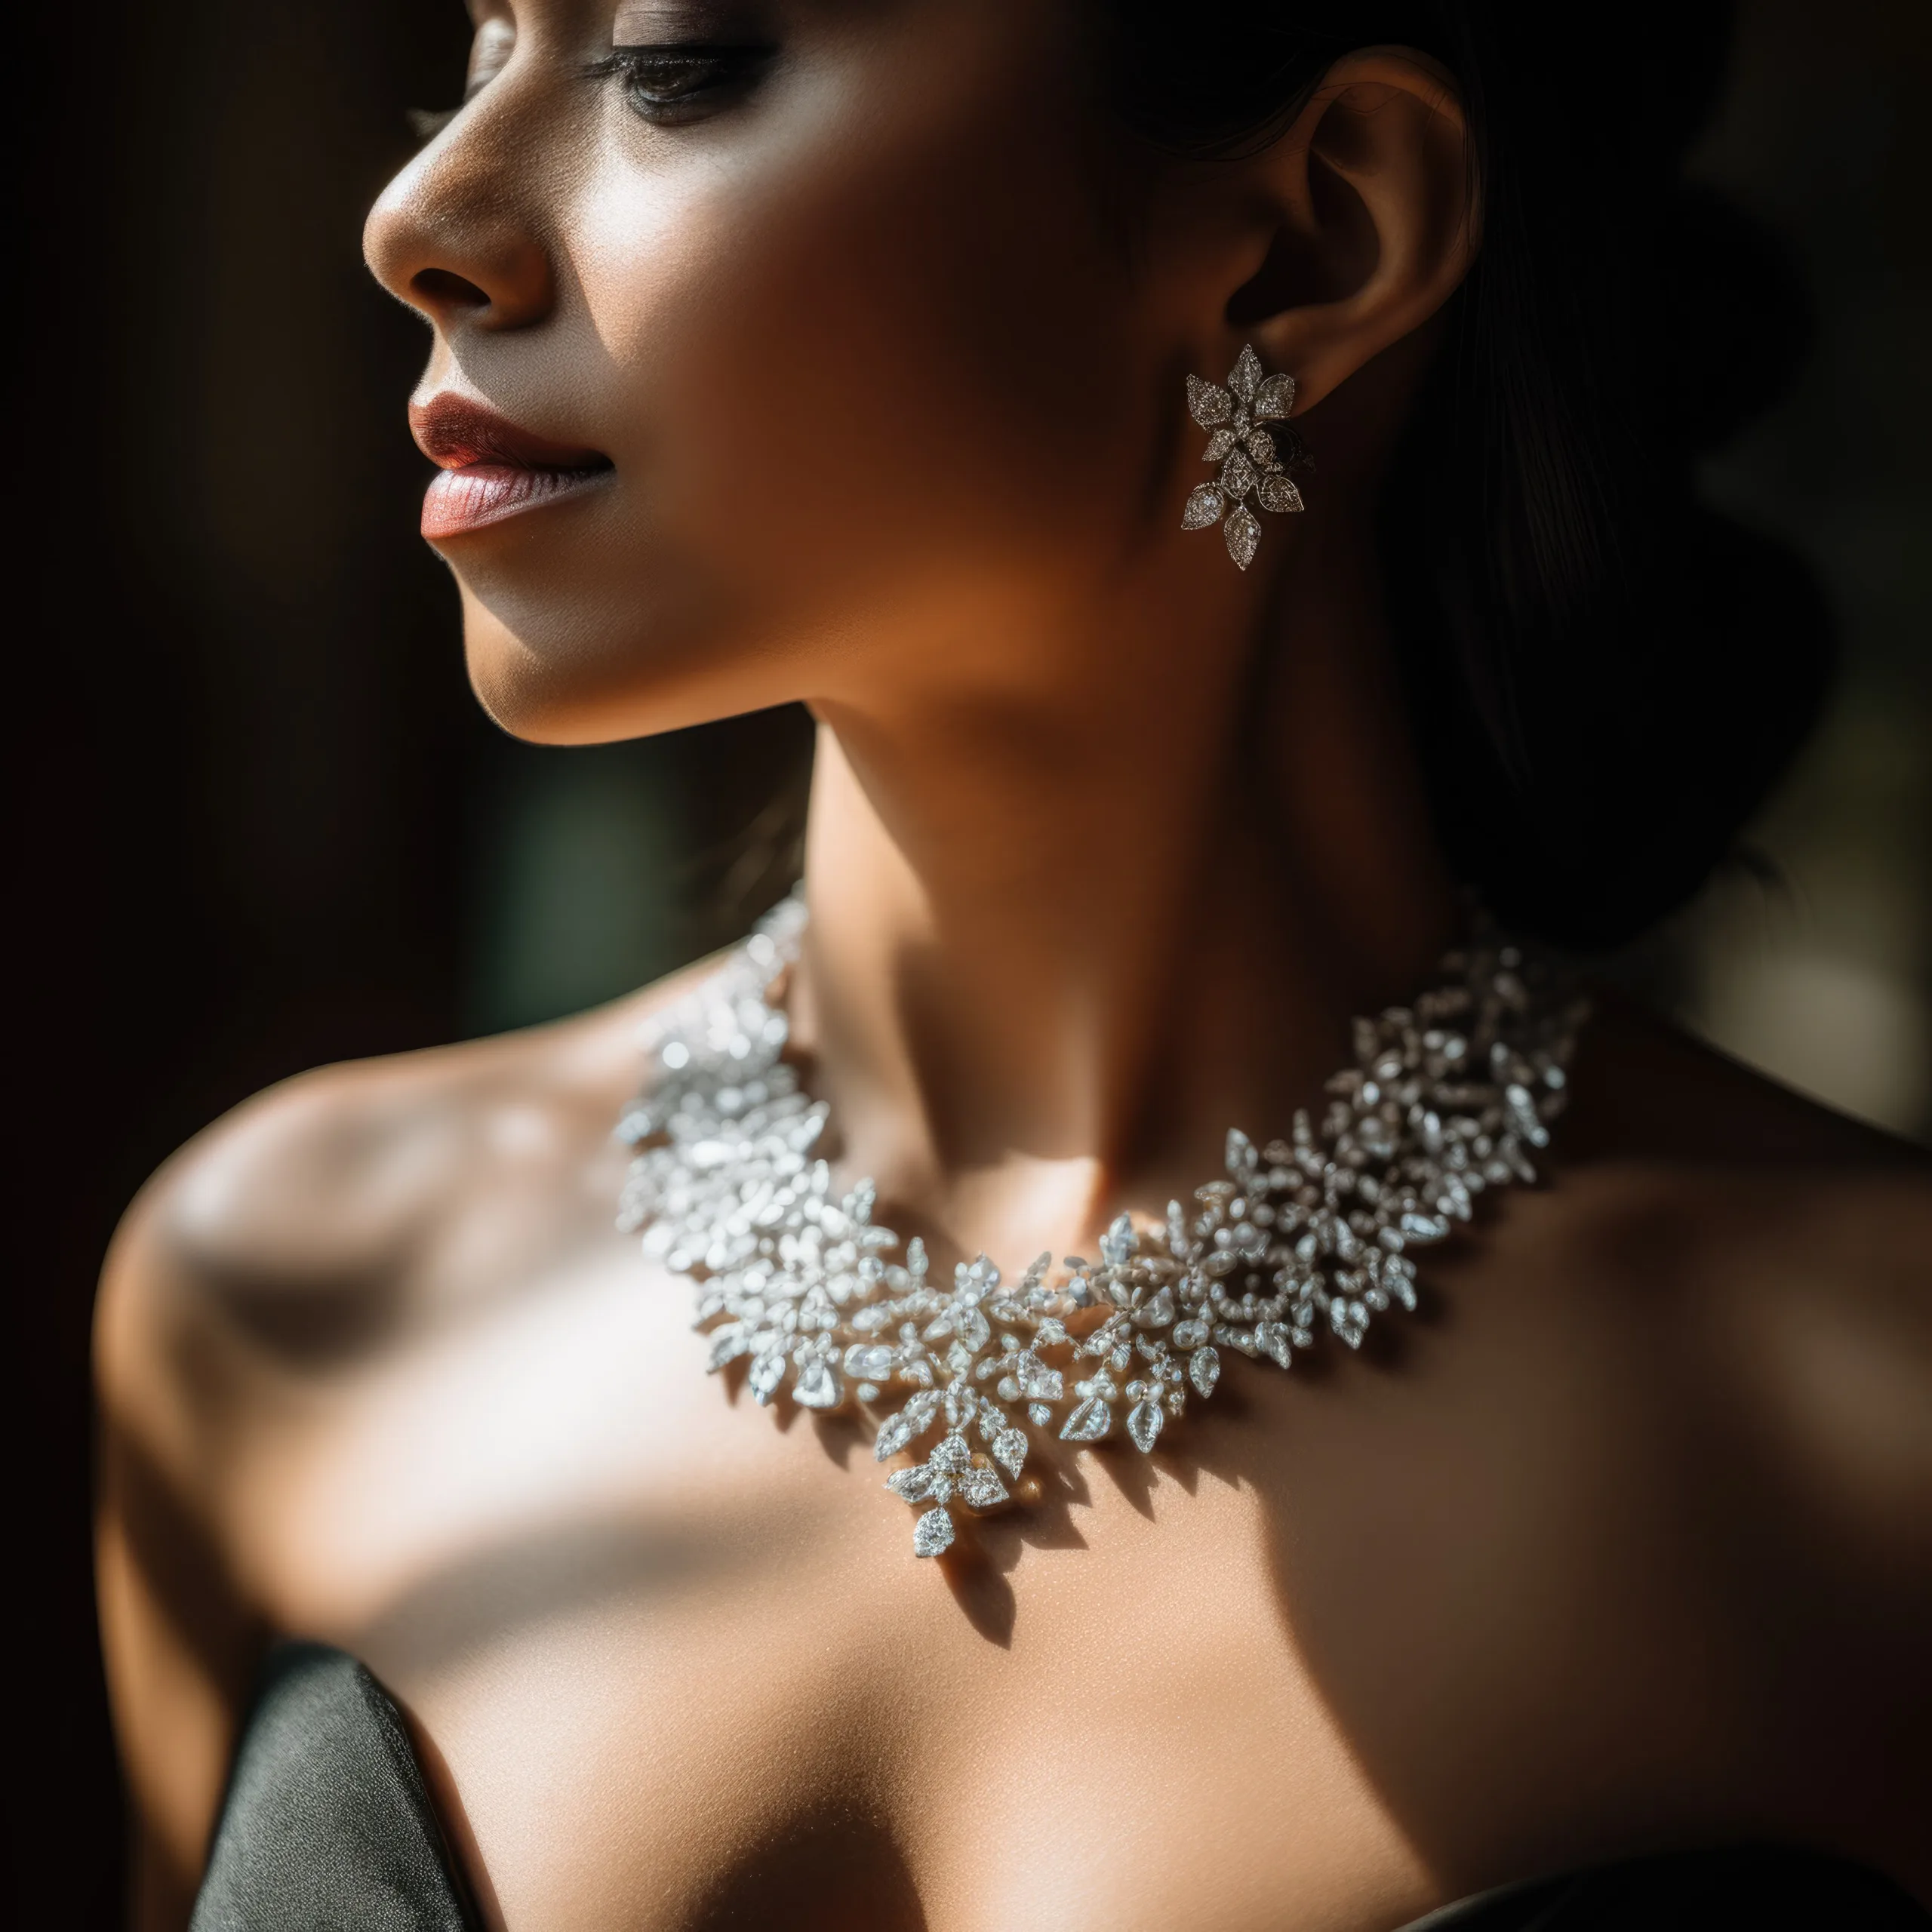 Wedding jewellery:a woman in a black dress wearing a necklace and earrings.